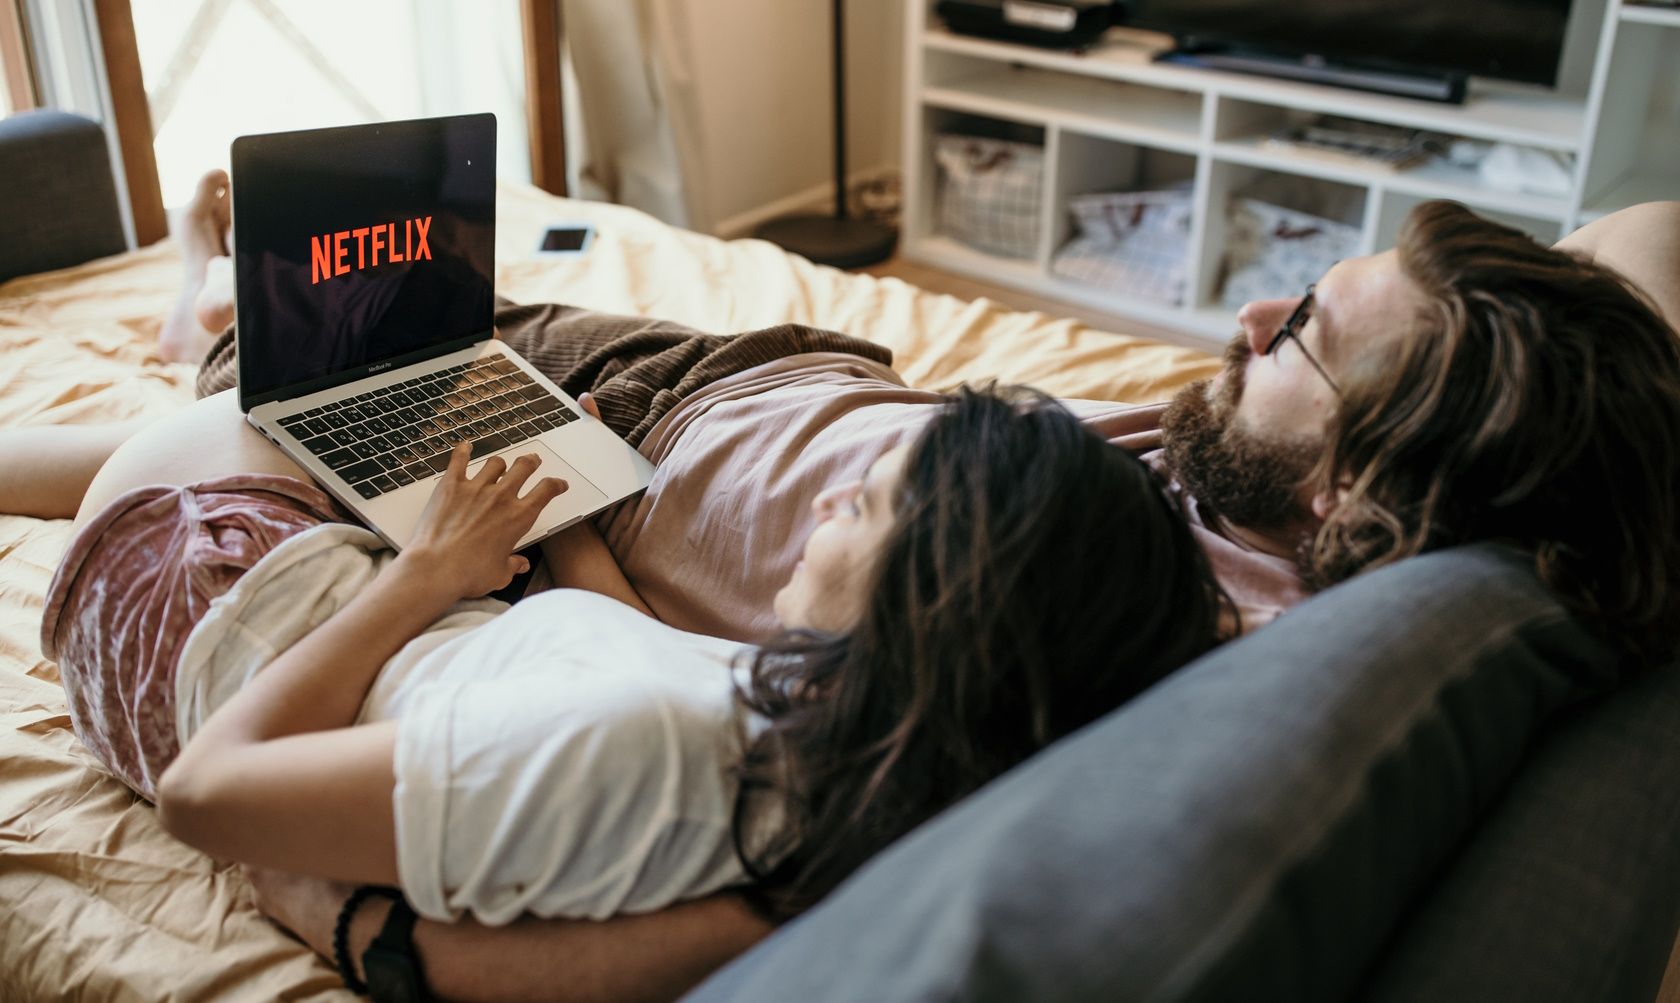 9 ways to watch movies with friends on Netflix, Disney, Hulu and